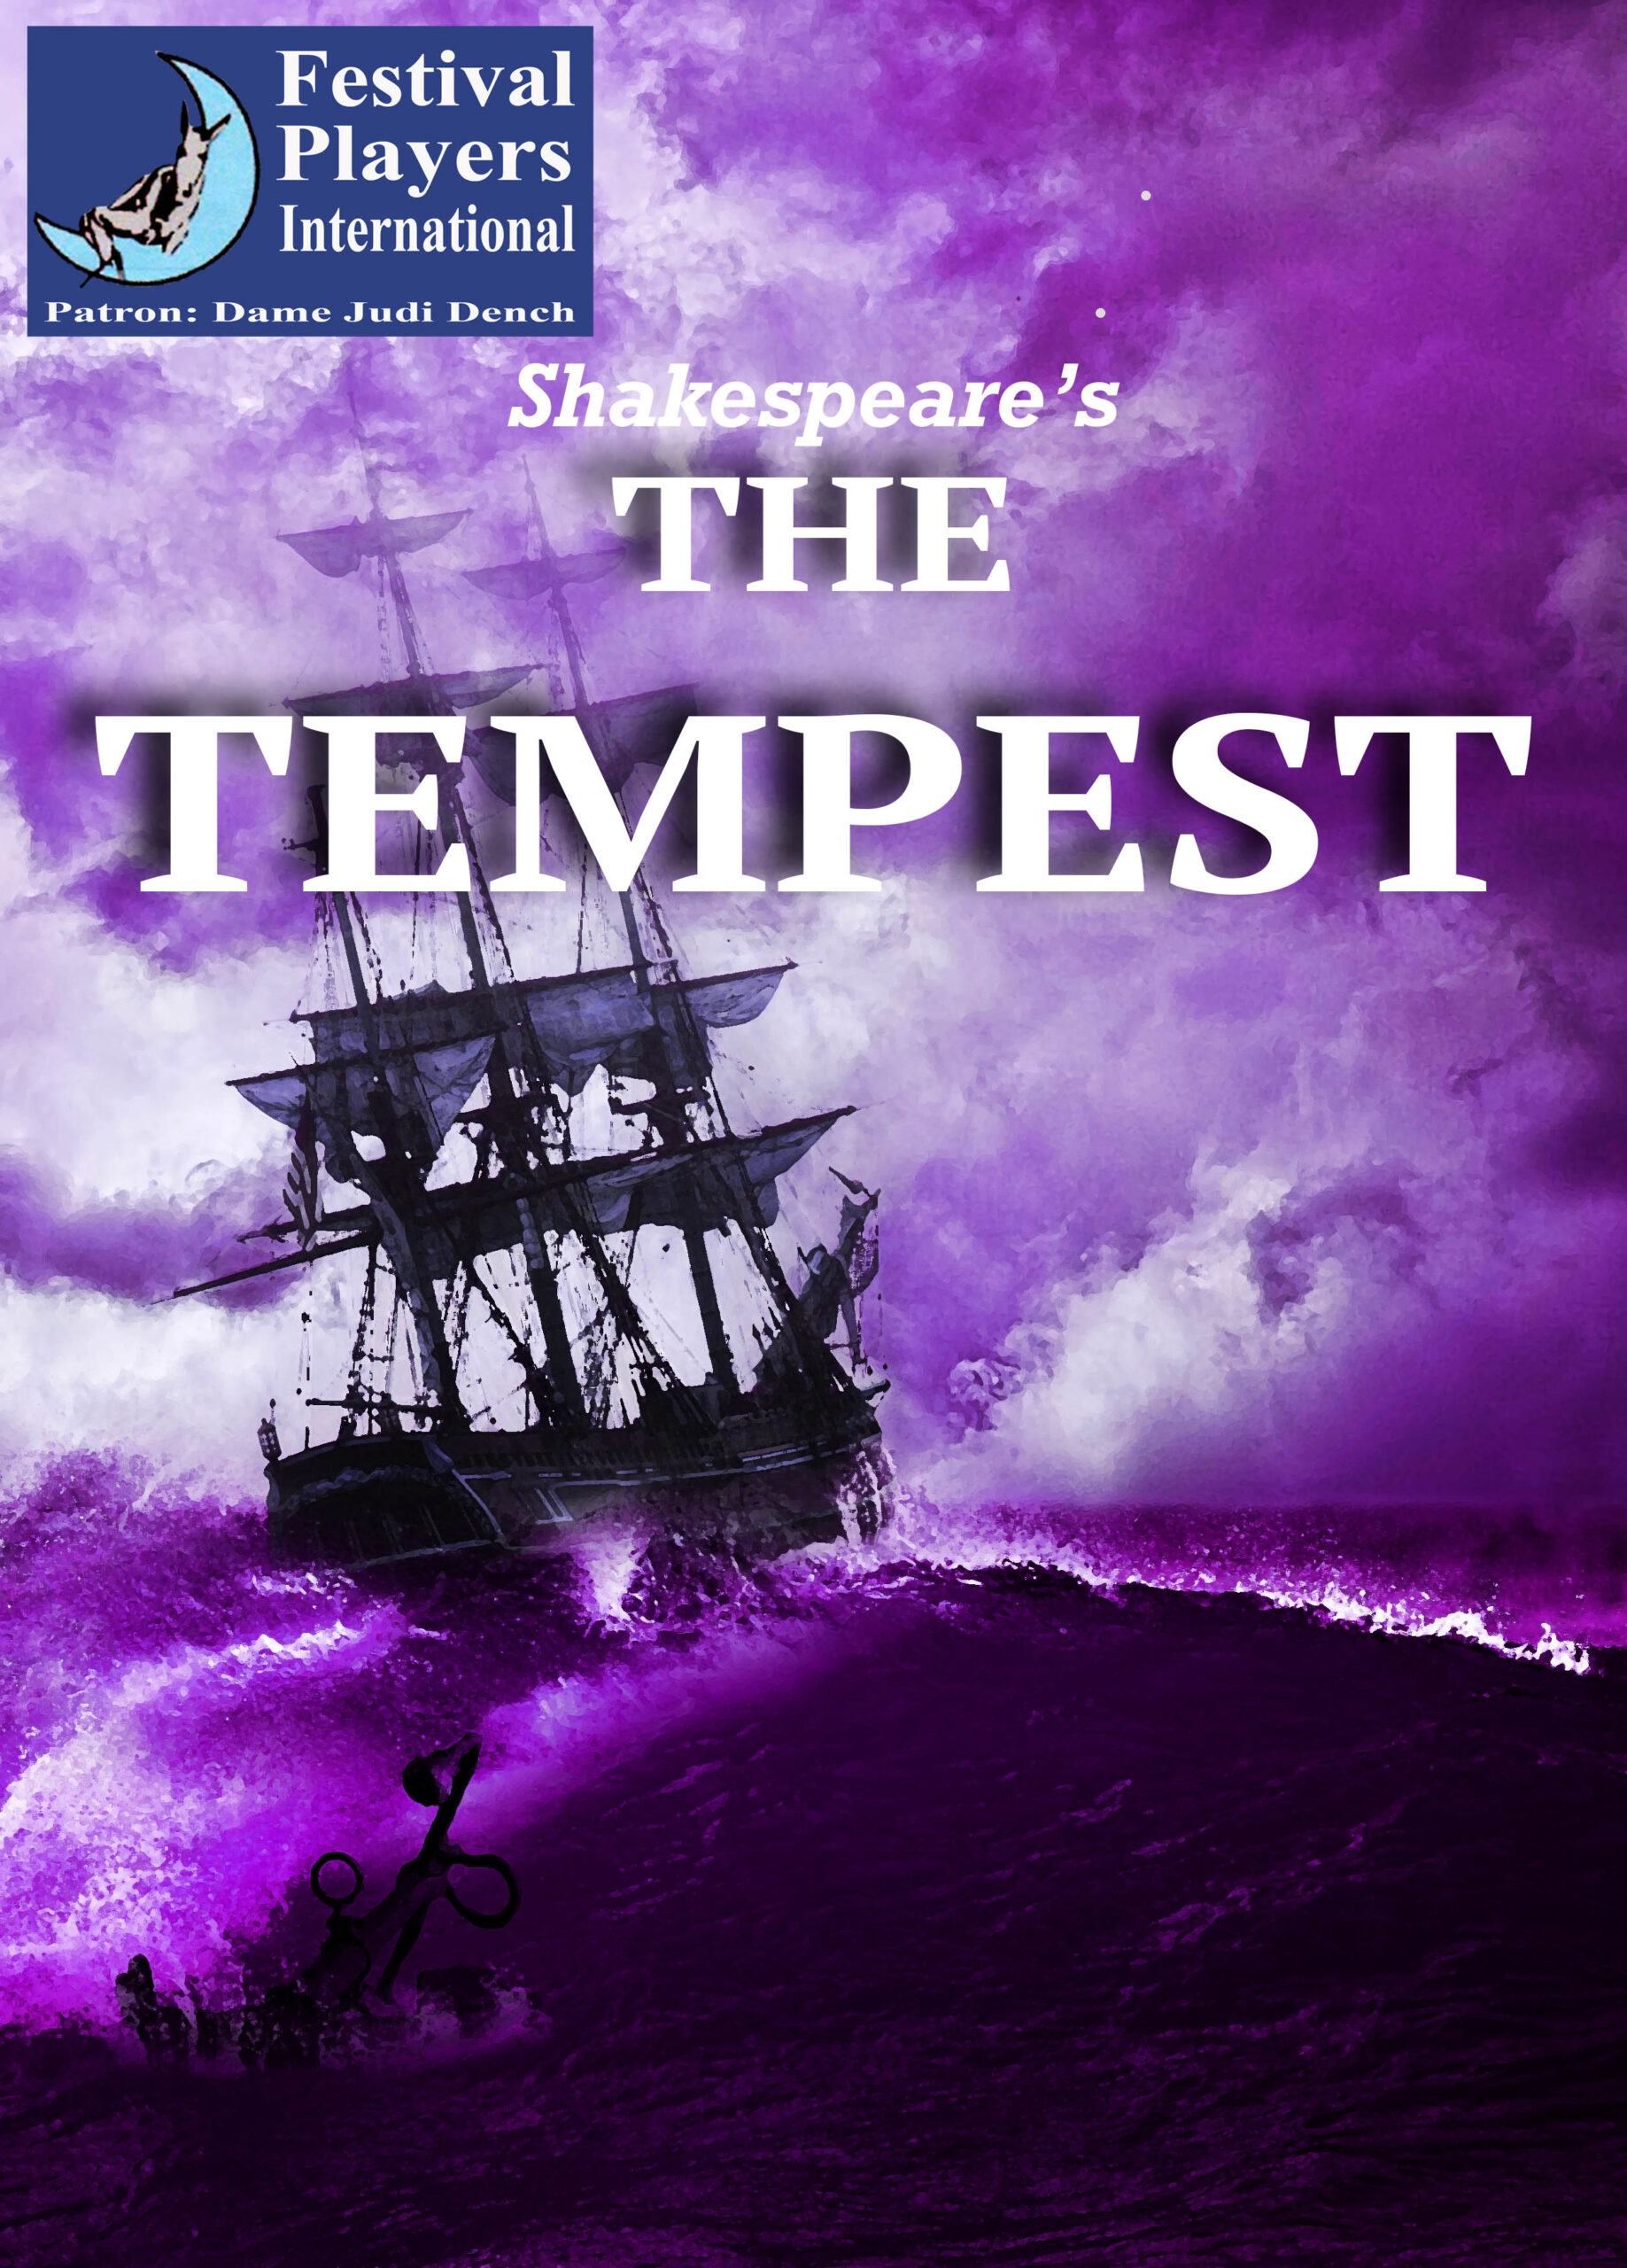 The Tempest – Shakespeare in the Garden – Monday 24th June